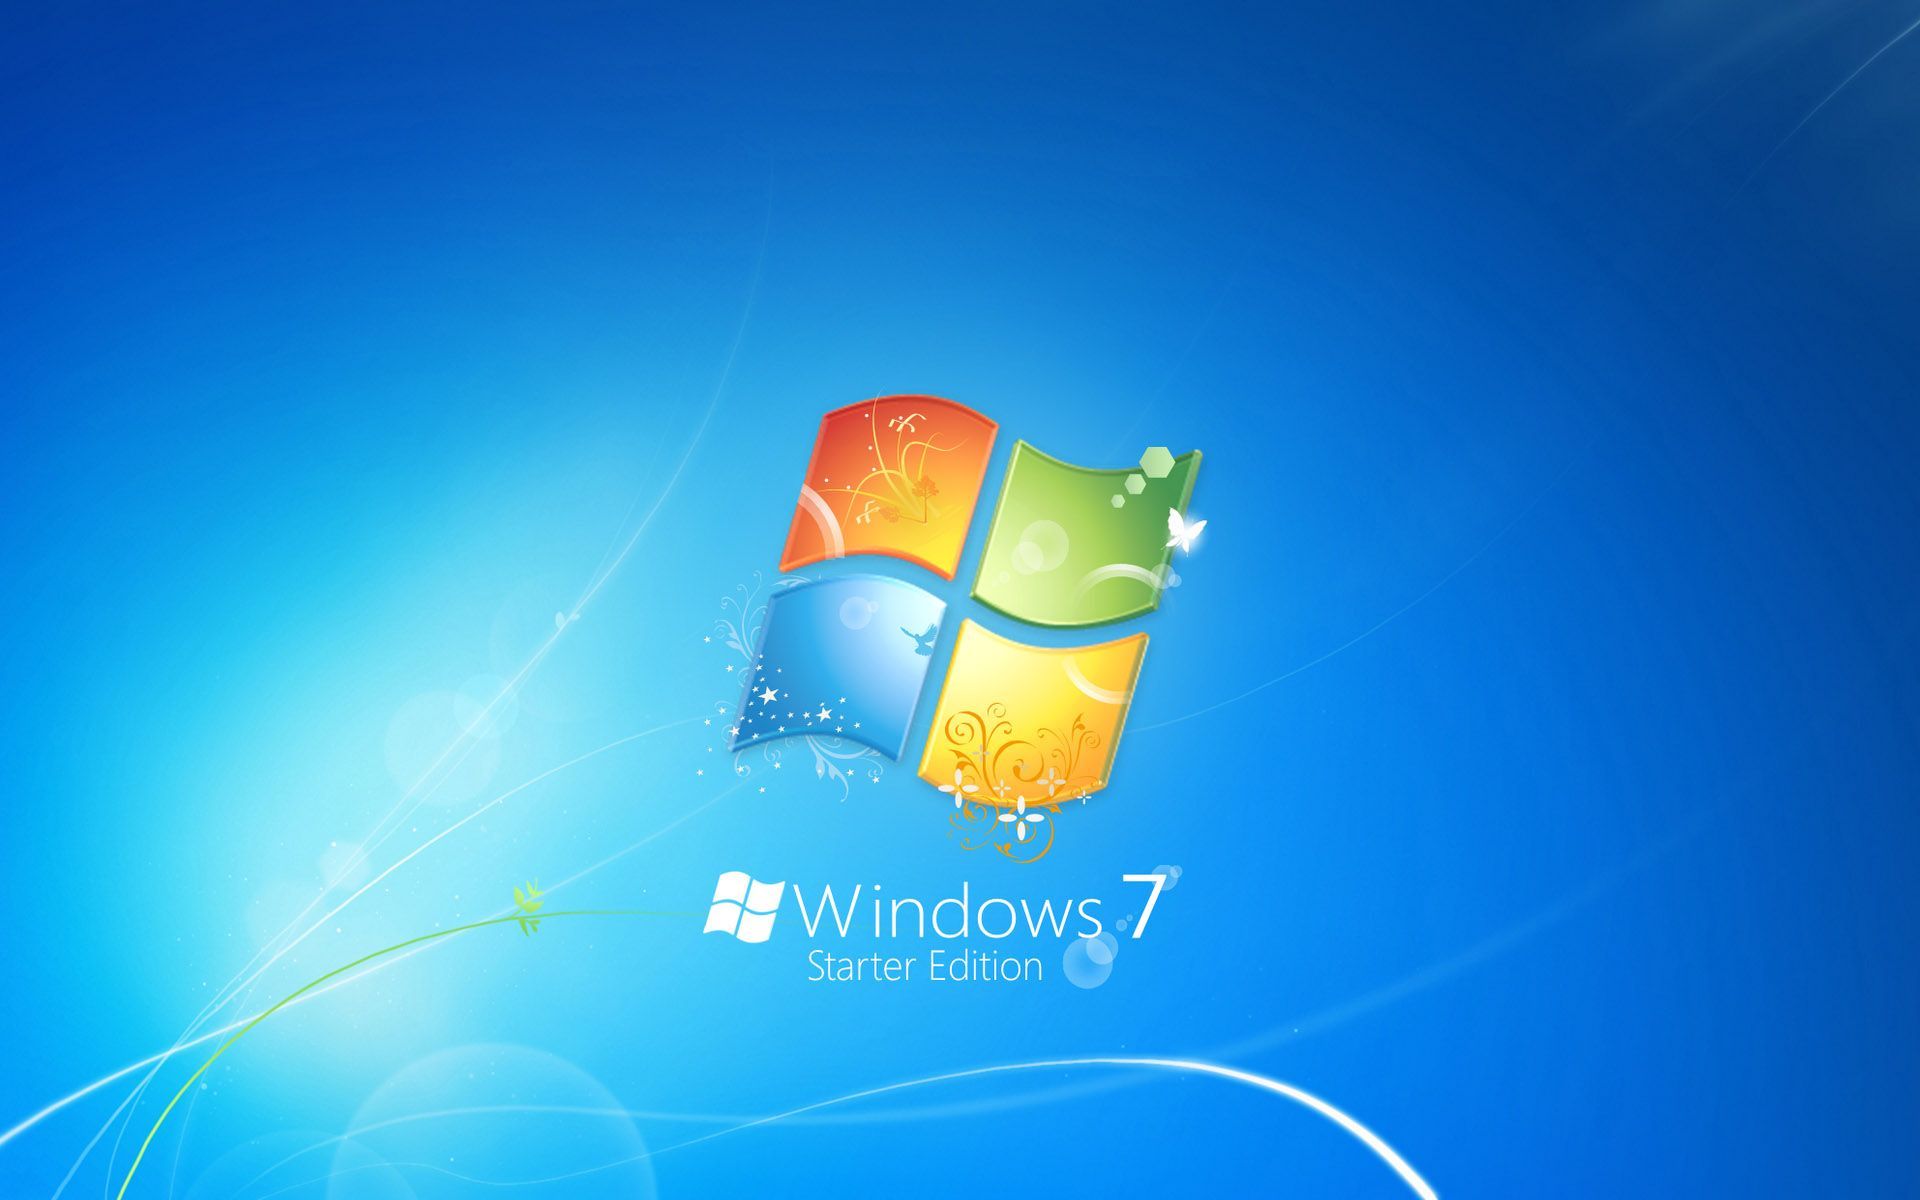 Windows 7 Starter Edition Wallpapers | HD Wallpapers